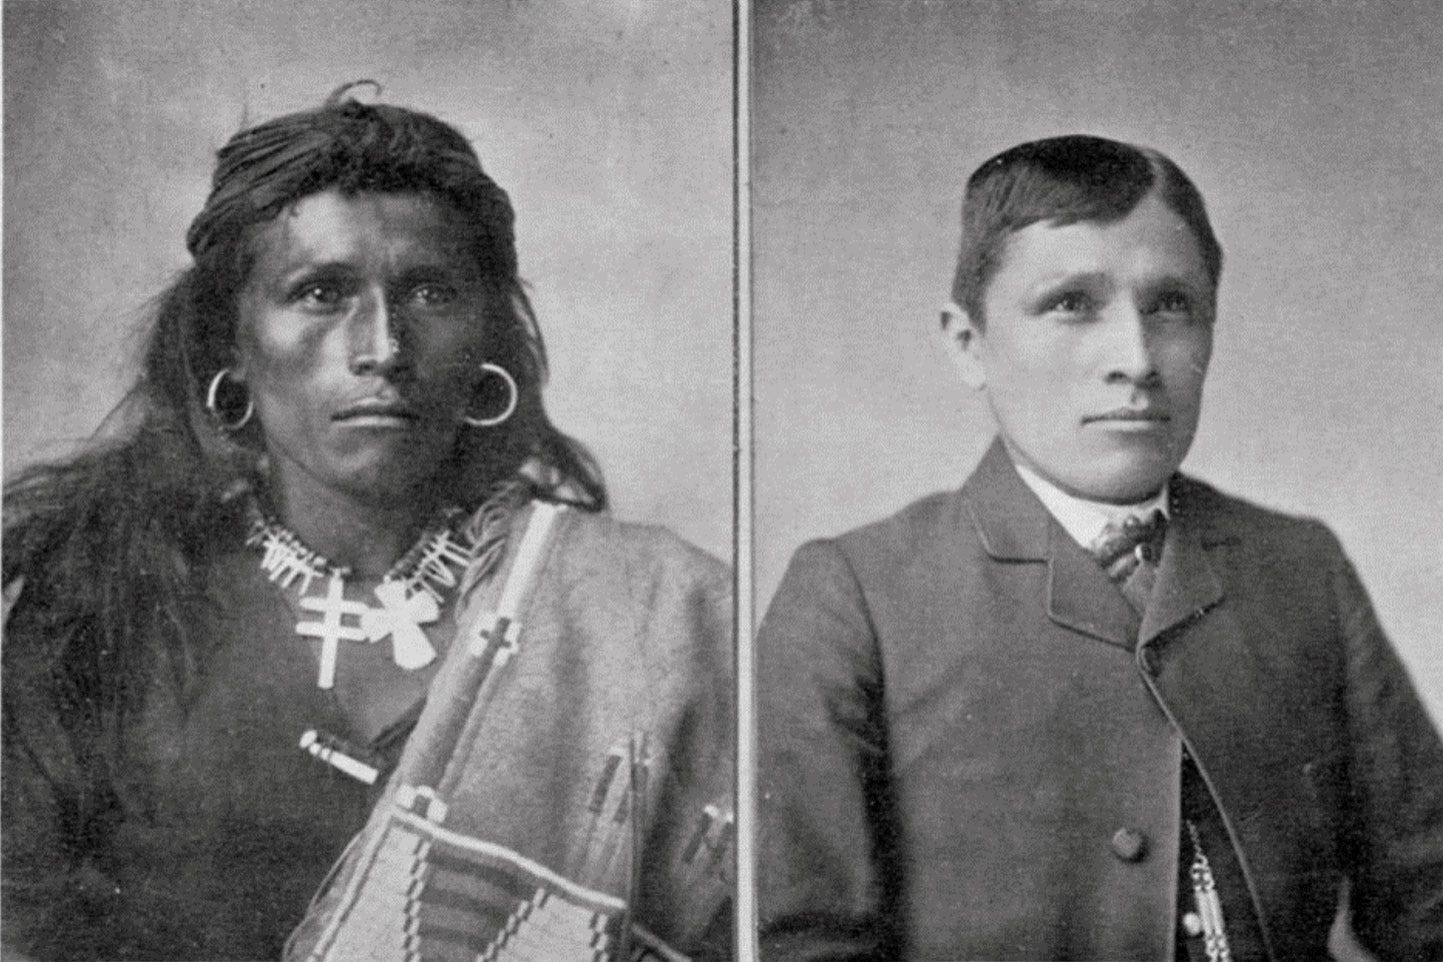 Before and after photograph of an Indigenous boy at a residential school in the 19th century